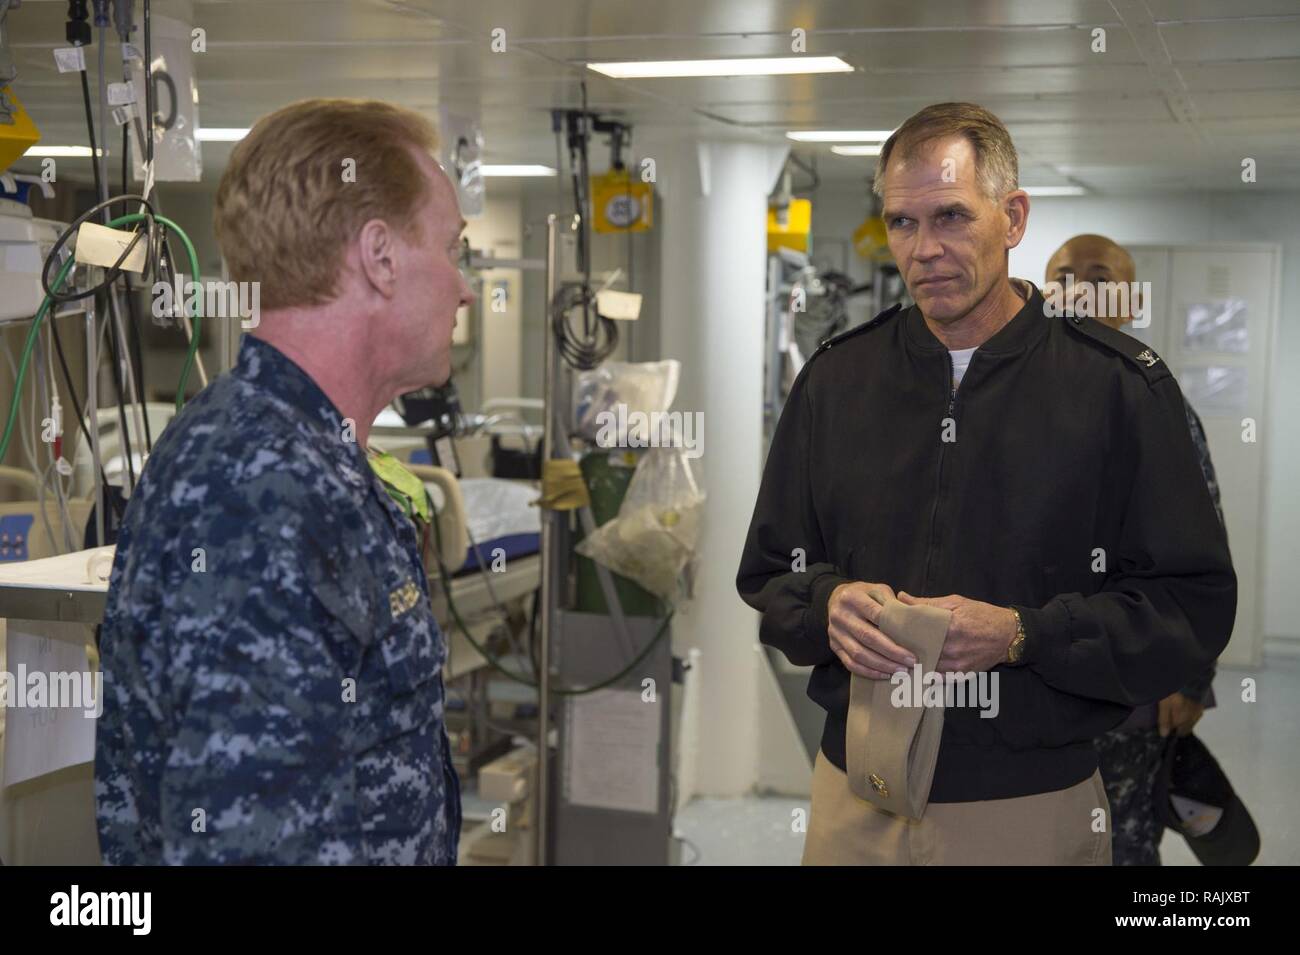 SASEBO, Japan(Feb. 14, 2017) Capt. Kurt Eichenmuller, senior medical officer of amphibious assault ship USS Bonhomme Richard (LHD 6), describes Bonhomme Richard’s medical emergency response capabilities to Capt. David O. Bynum, chaplain, U.S. Pacific Fleet, during a ship tour. Bonhomme Richard, forward-deployed to Sasebo, Japan, is serving forward to provide a rapid-response capability in the event of a regional contingency or natural disaster. Stock Photo